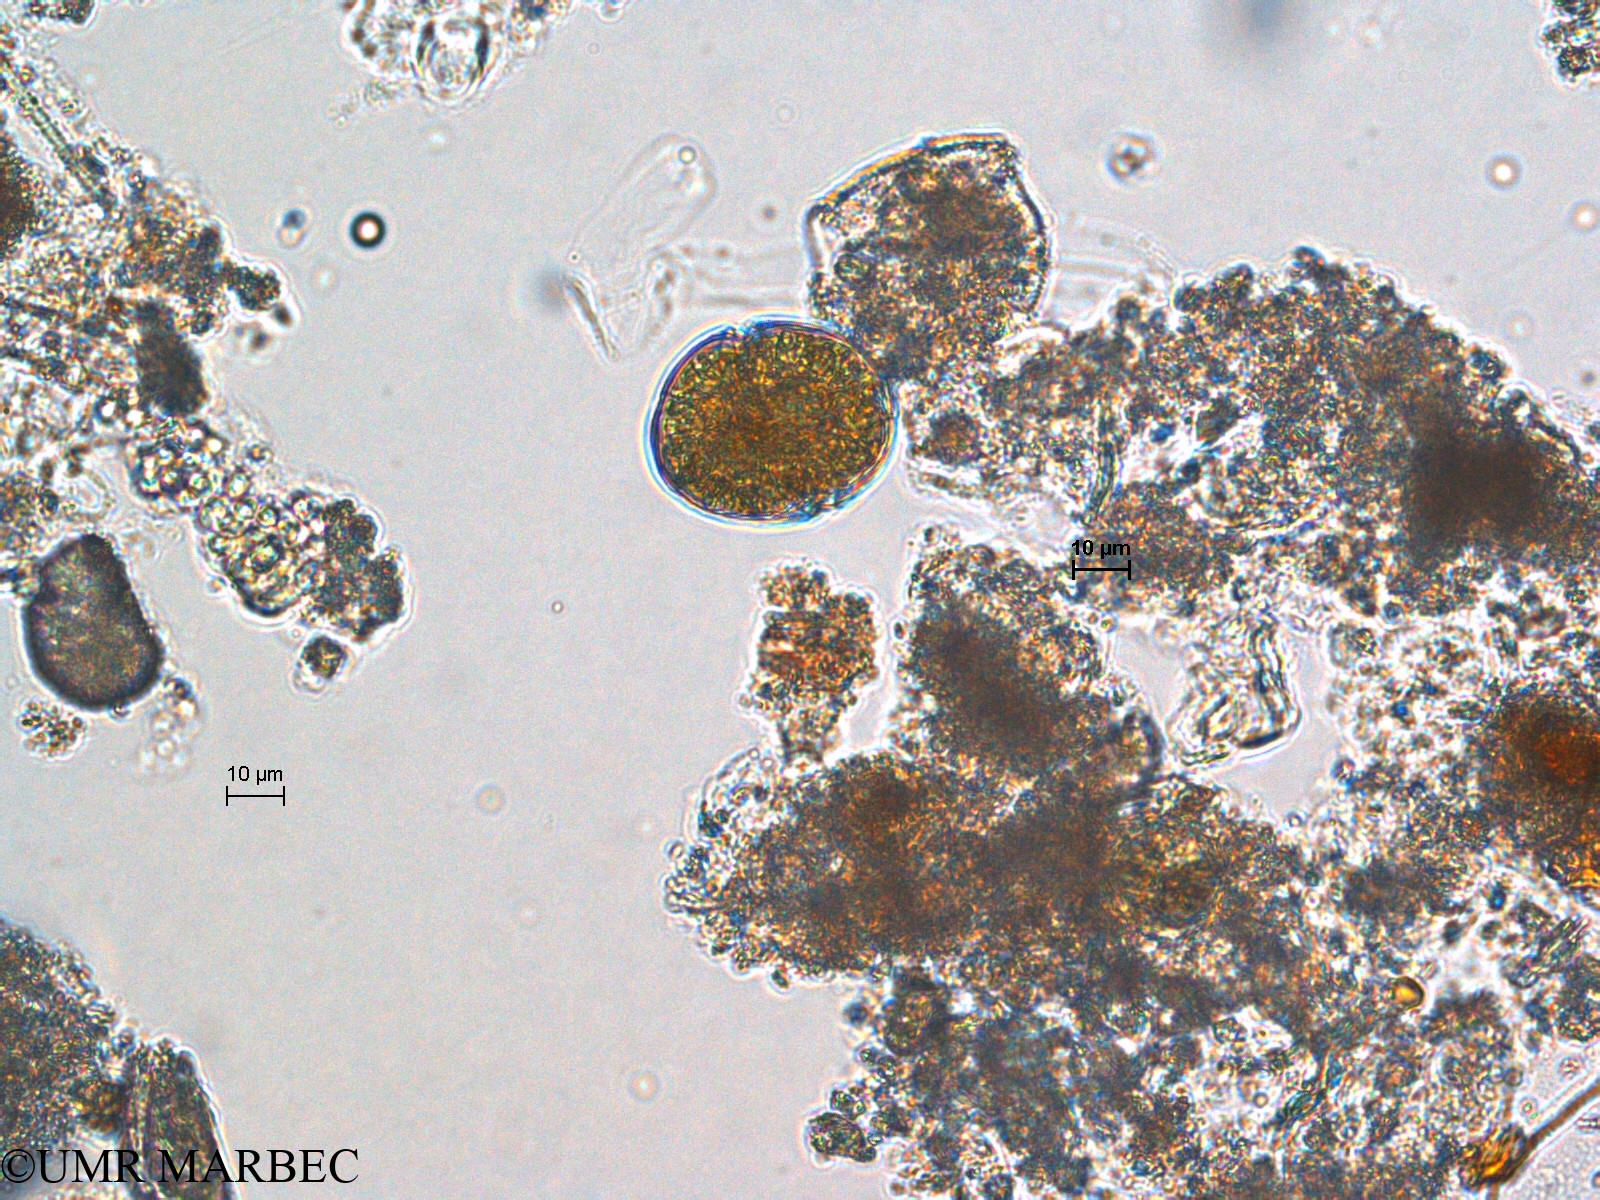 phyto/Scattered_Islands/europa/COMMA April 2011/Gymnodinium sp2 (ancien Dino s -3)(copy).jpg